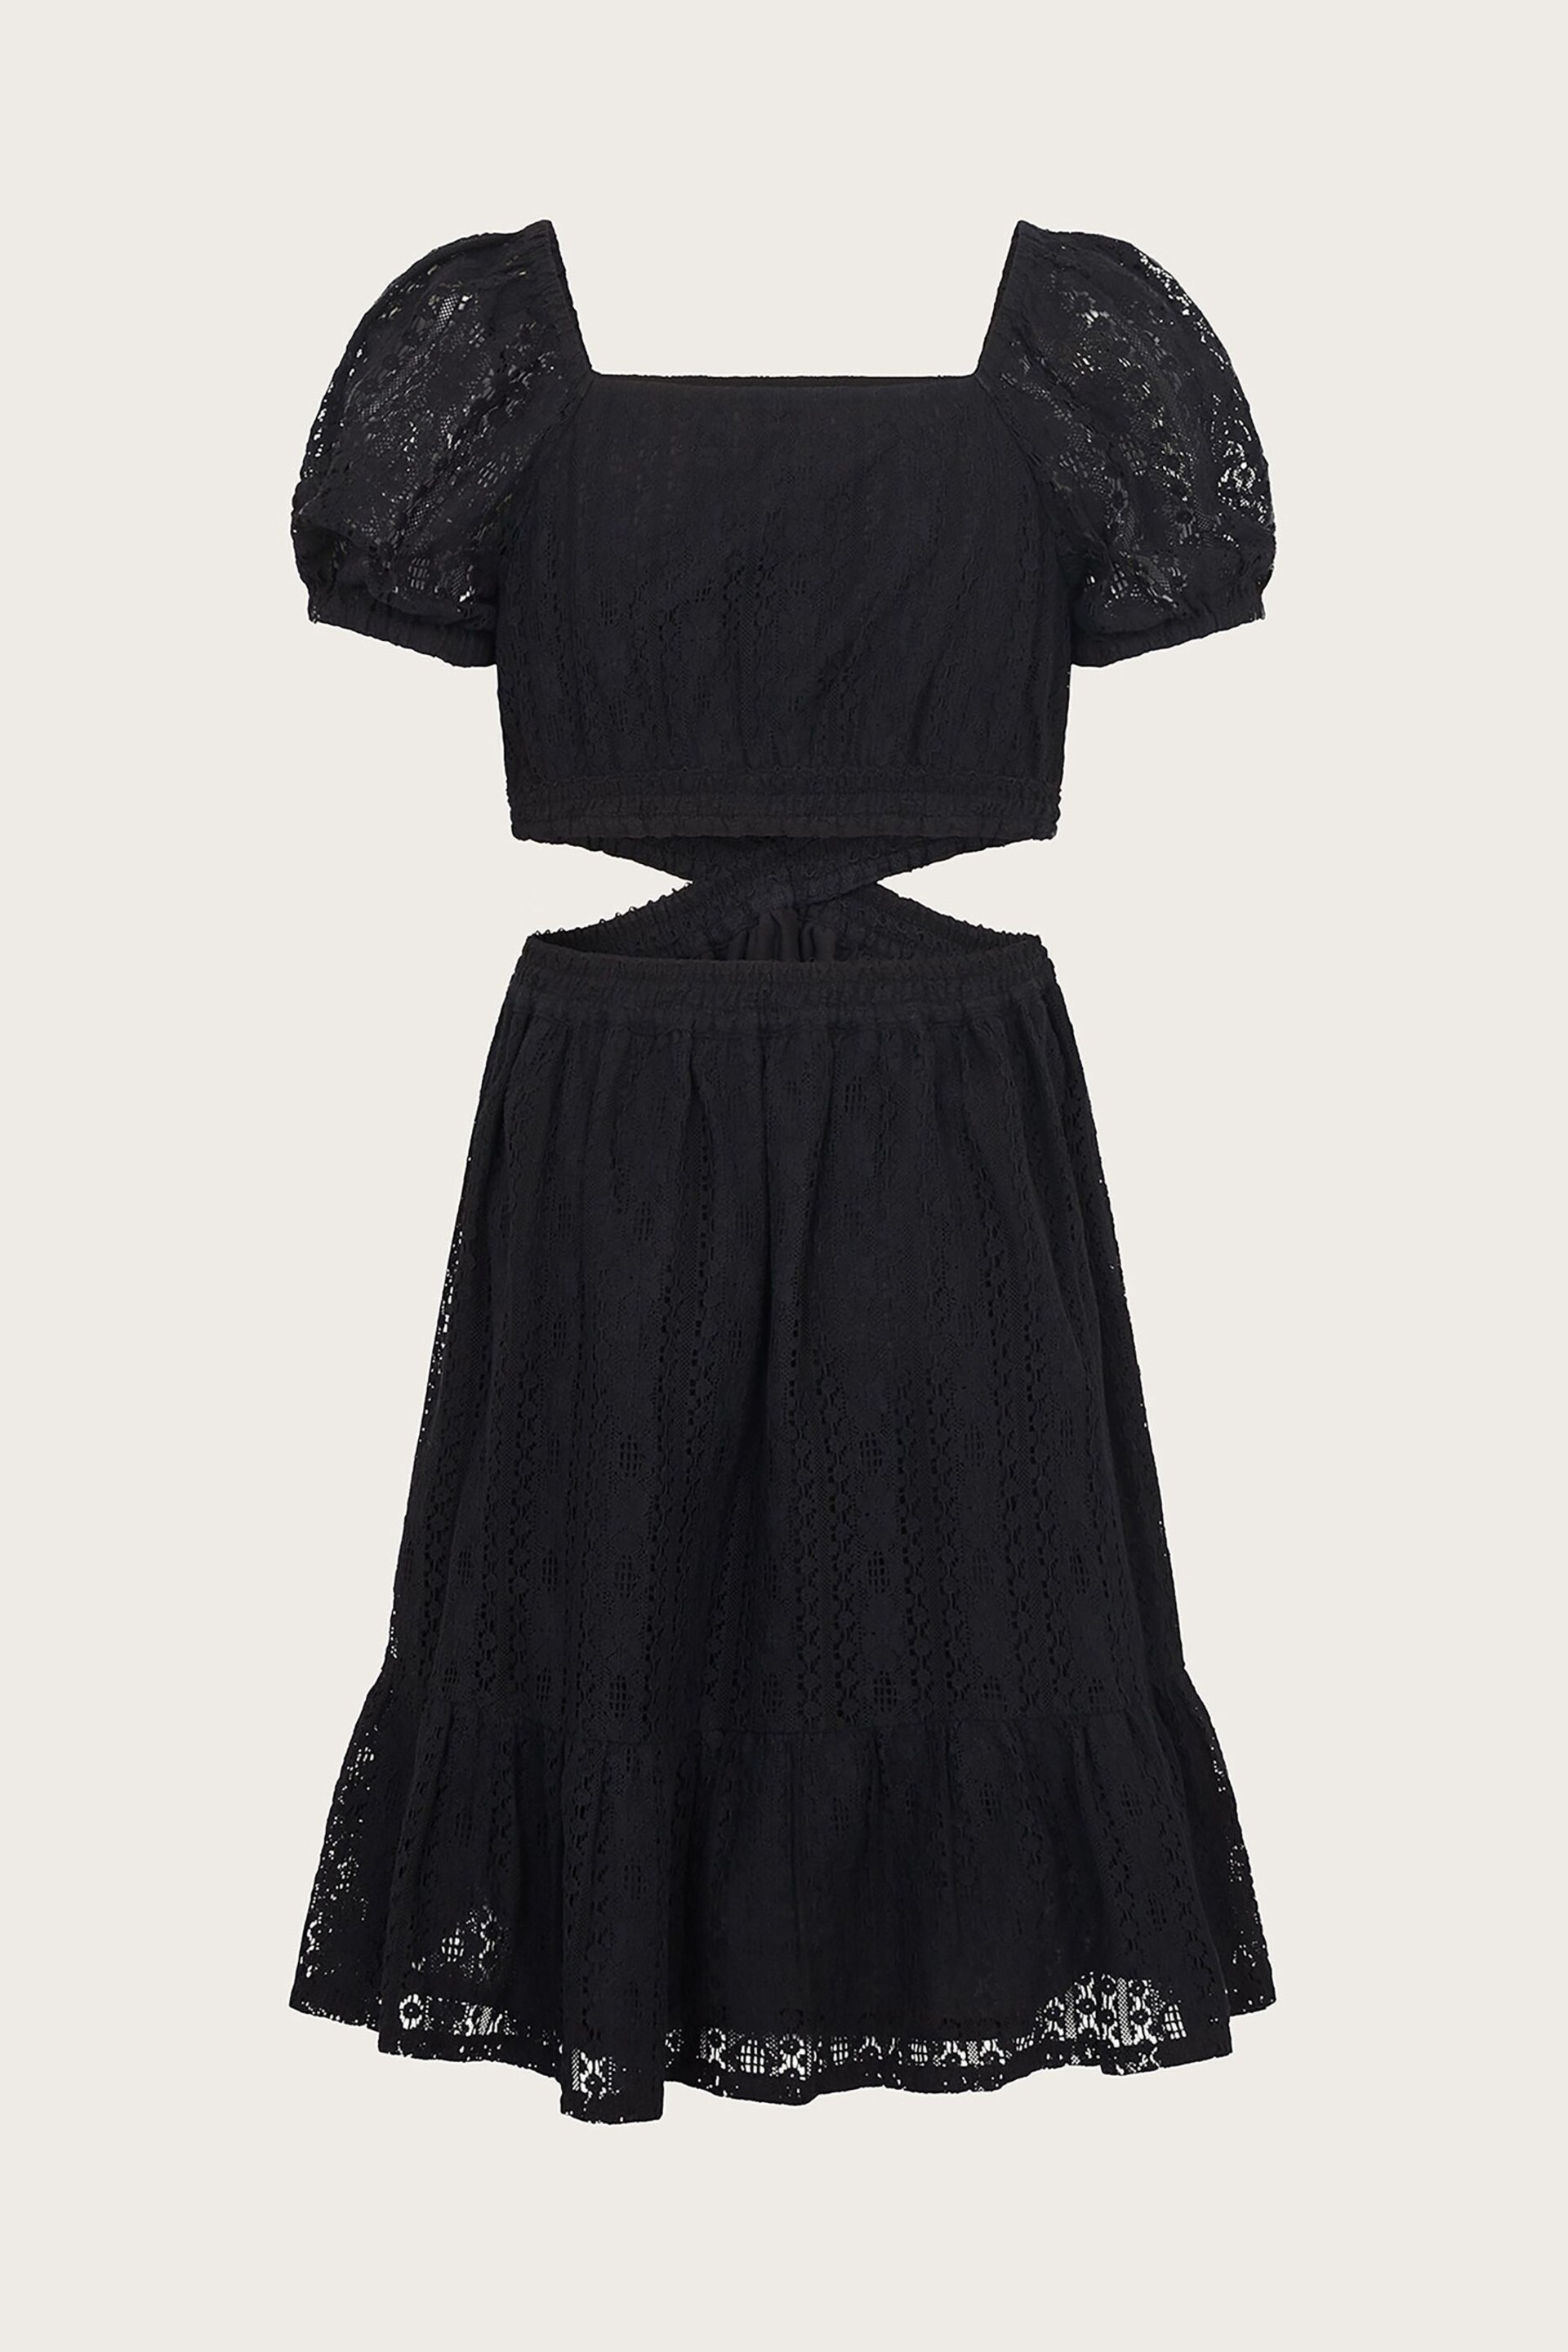 Monsoon Black Lace Cut Out Dress - Image 1 of 3